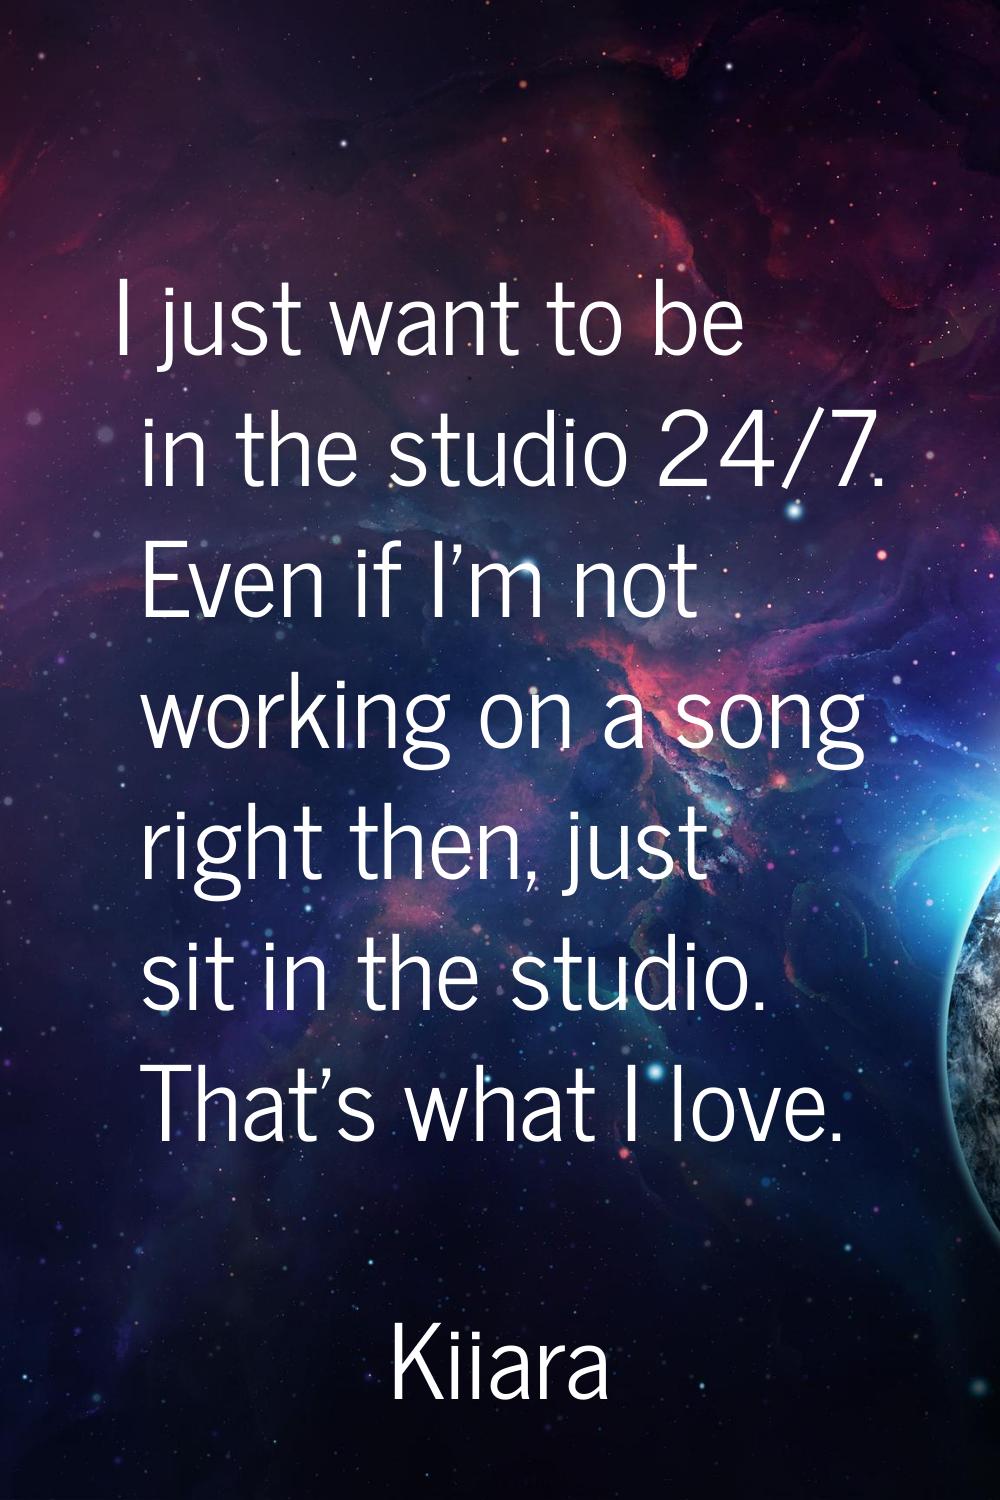 I just want to be in the studio 24/7. Even if I'm not working on a song right then, just sit in the